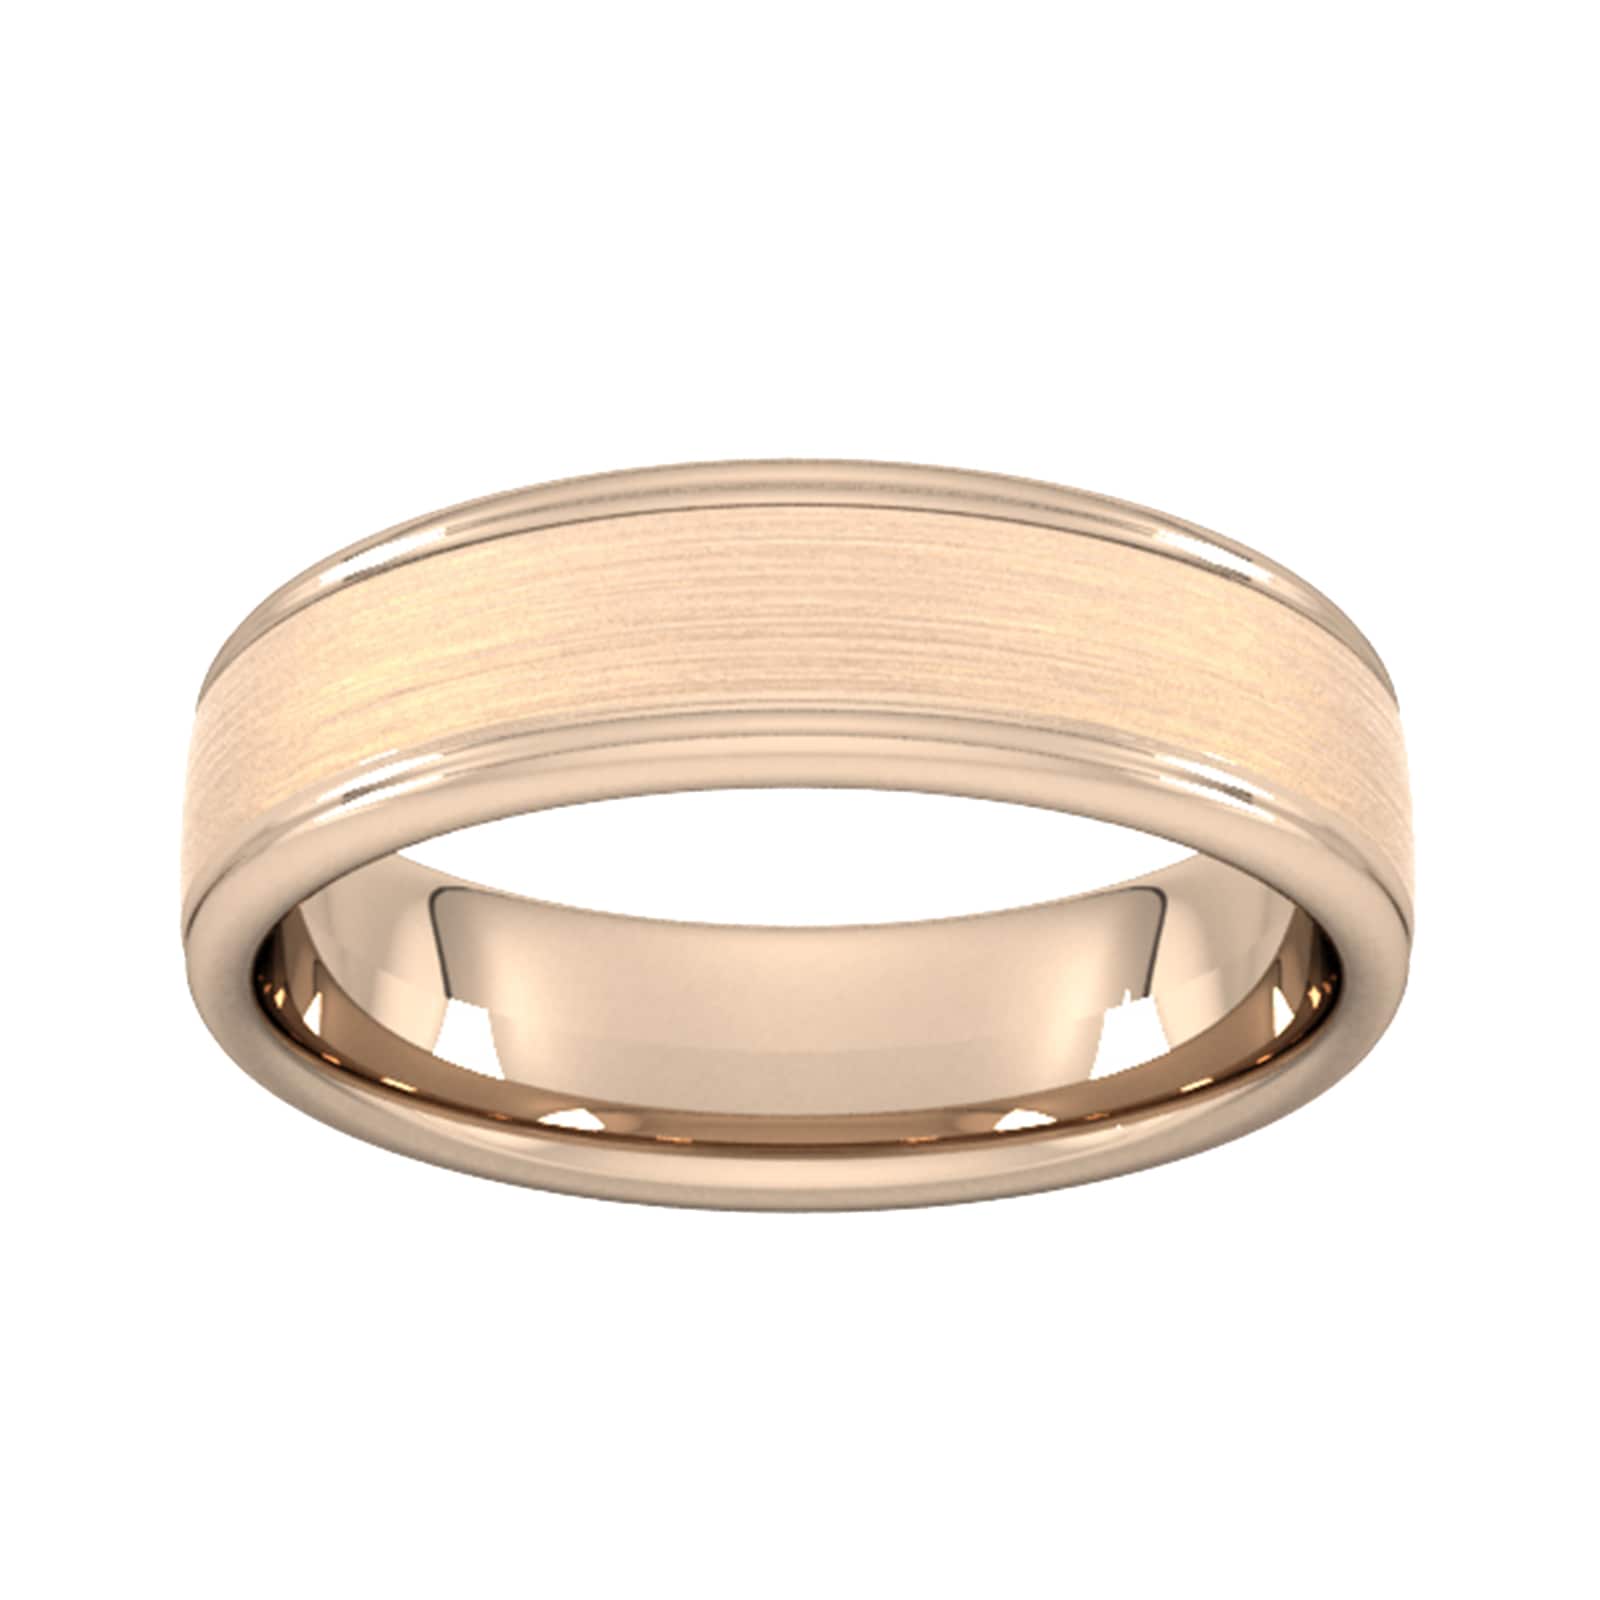 5mm Traditional Court Heavy Matt Centre With Grooves Wedding Ring In 9 Carat Rose Gold - Ring Size K